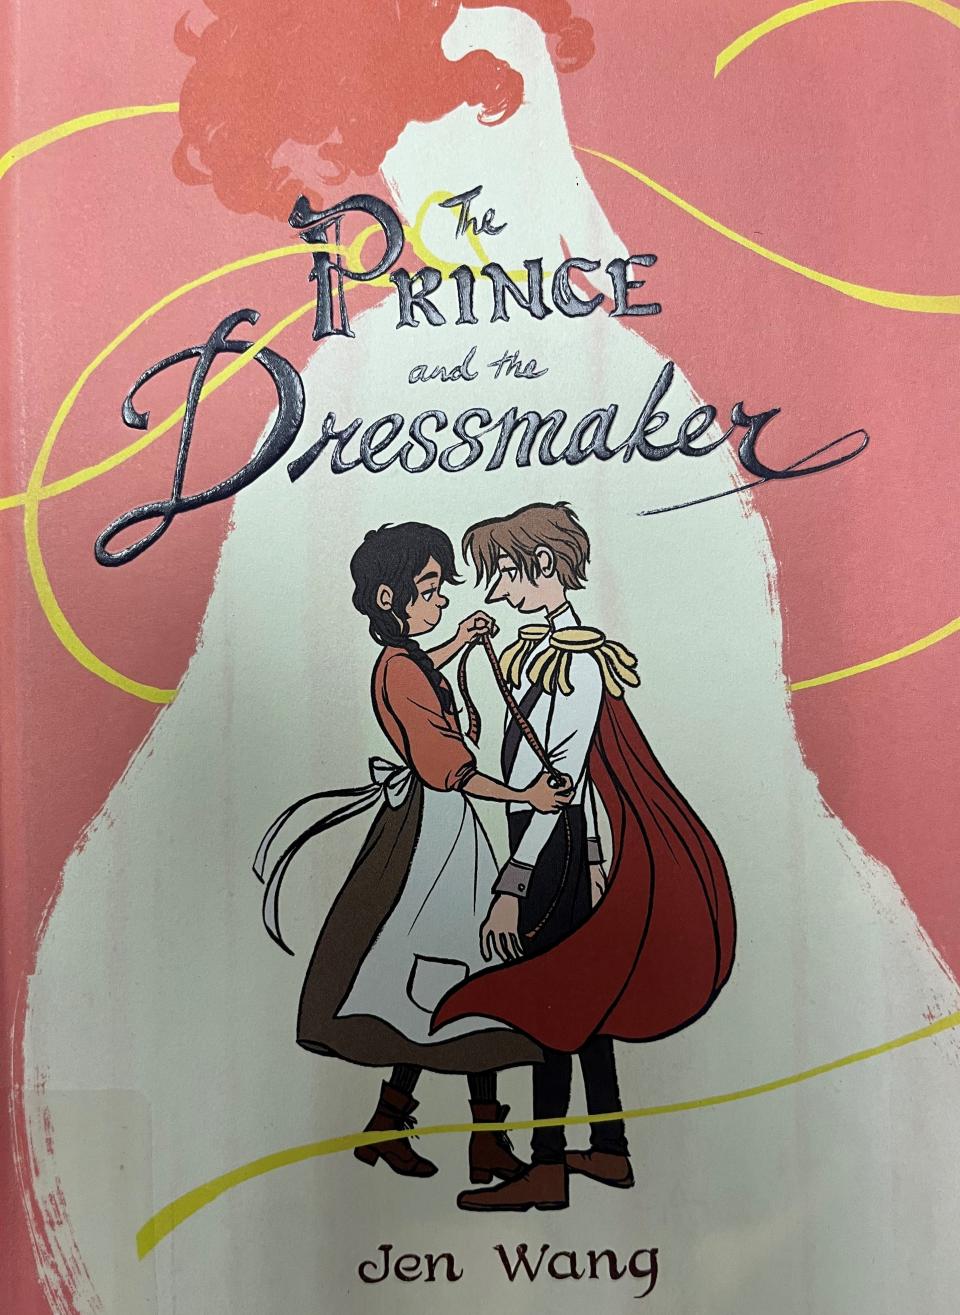 "The Prince and the Dressmaker" book cover.